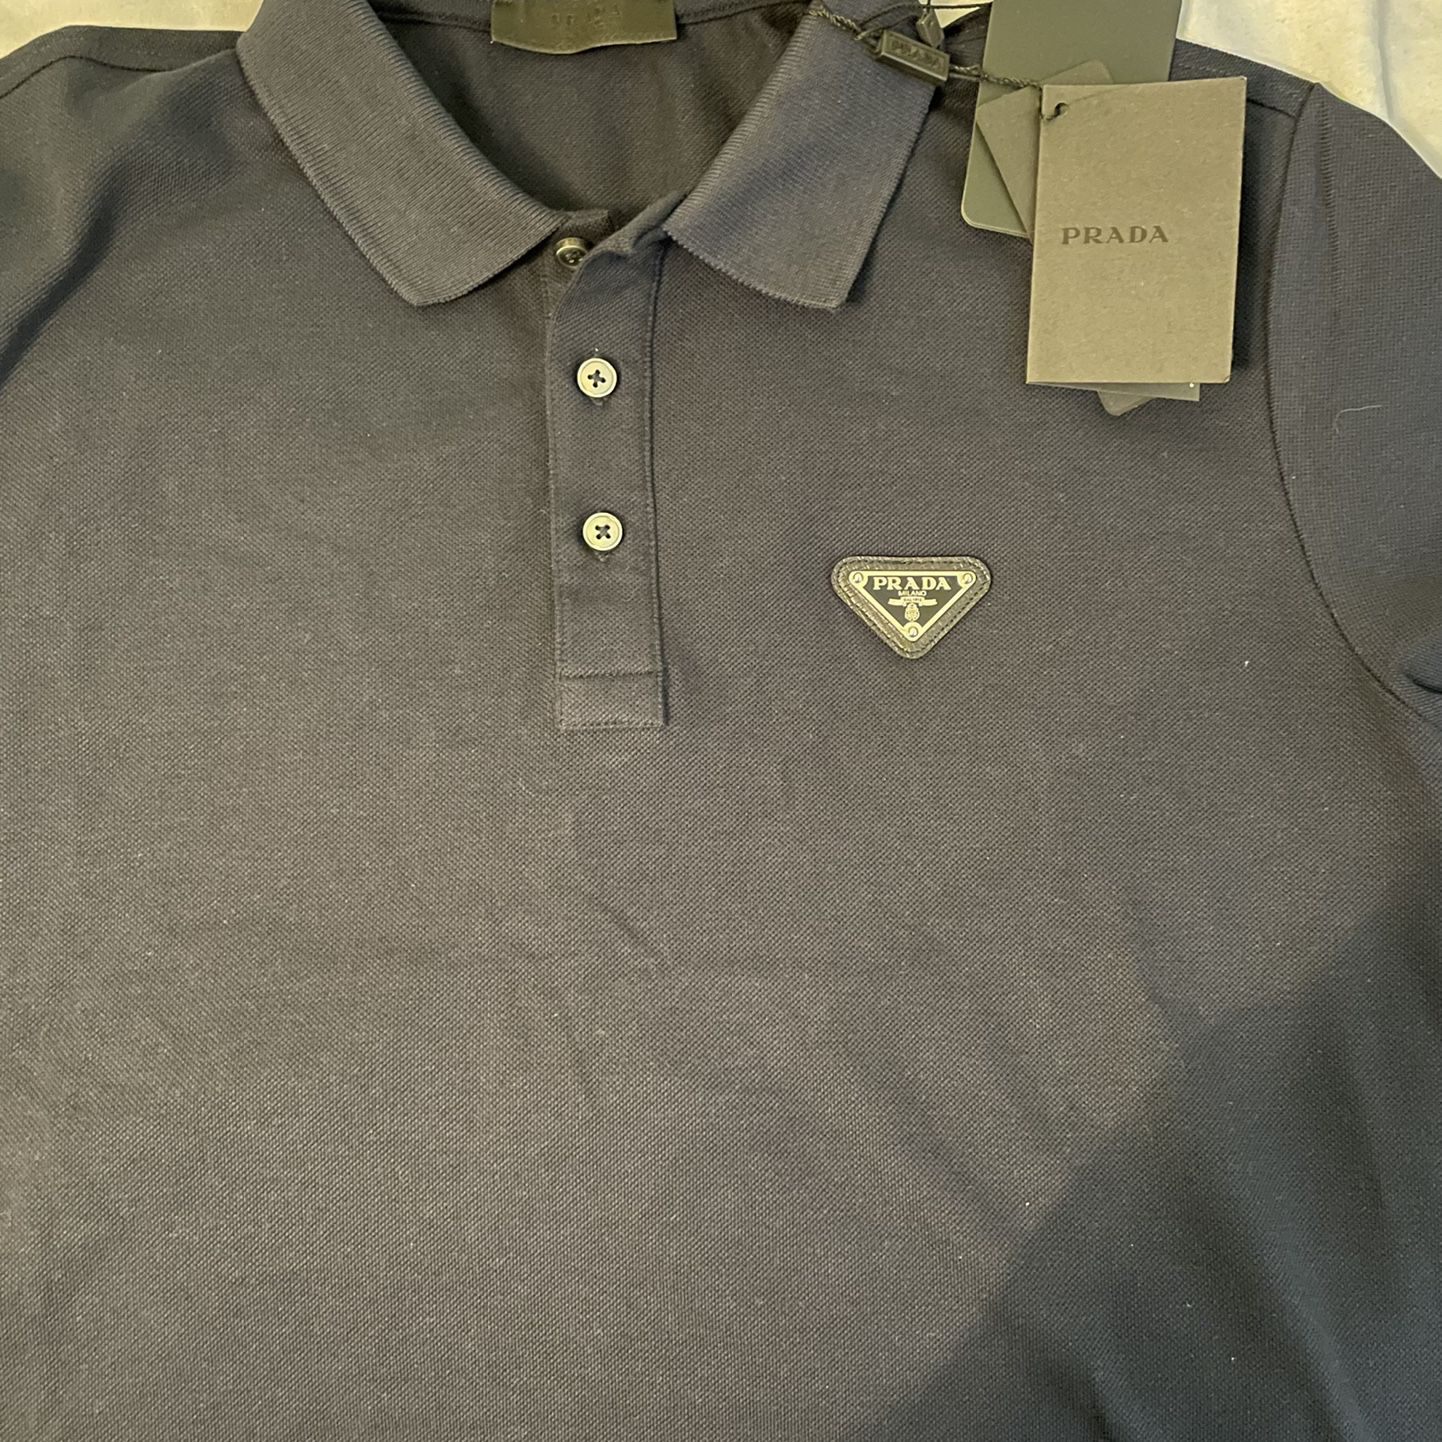 Prada polo shirt for Sale in Brooklyn, NY - OfferUp